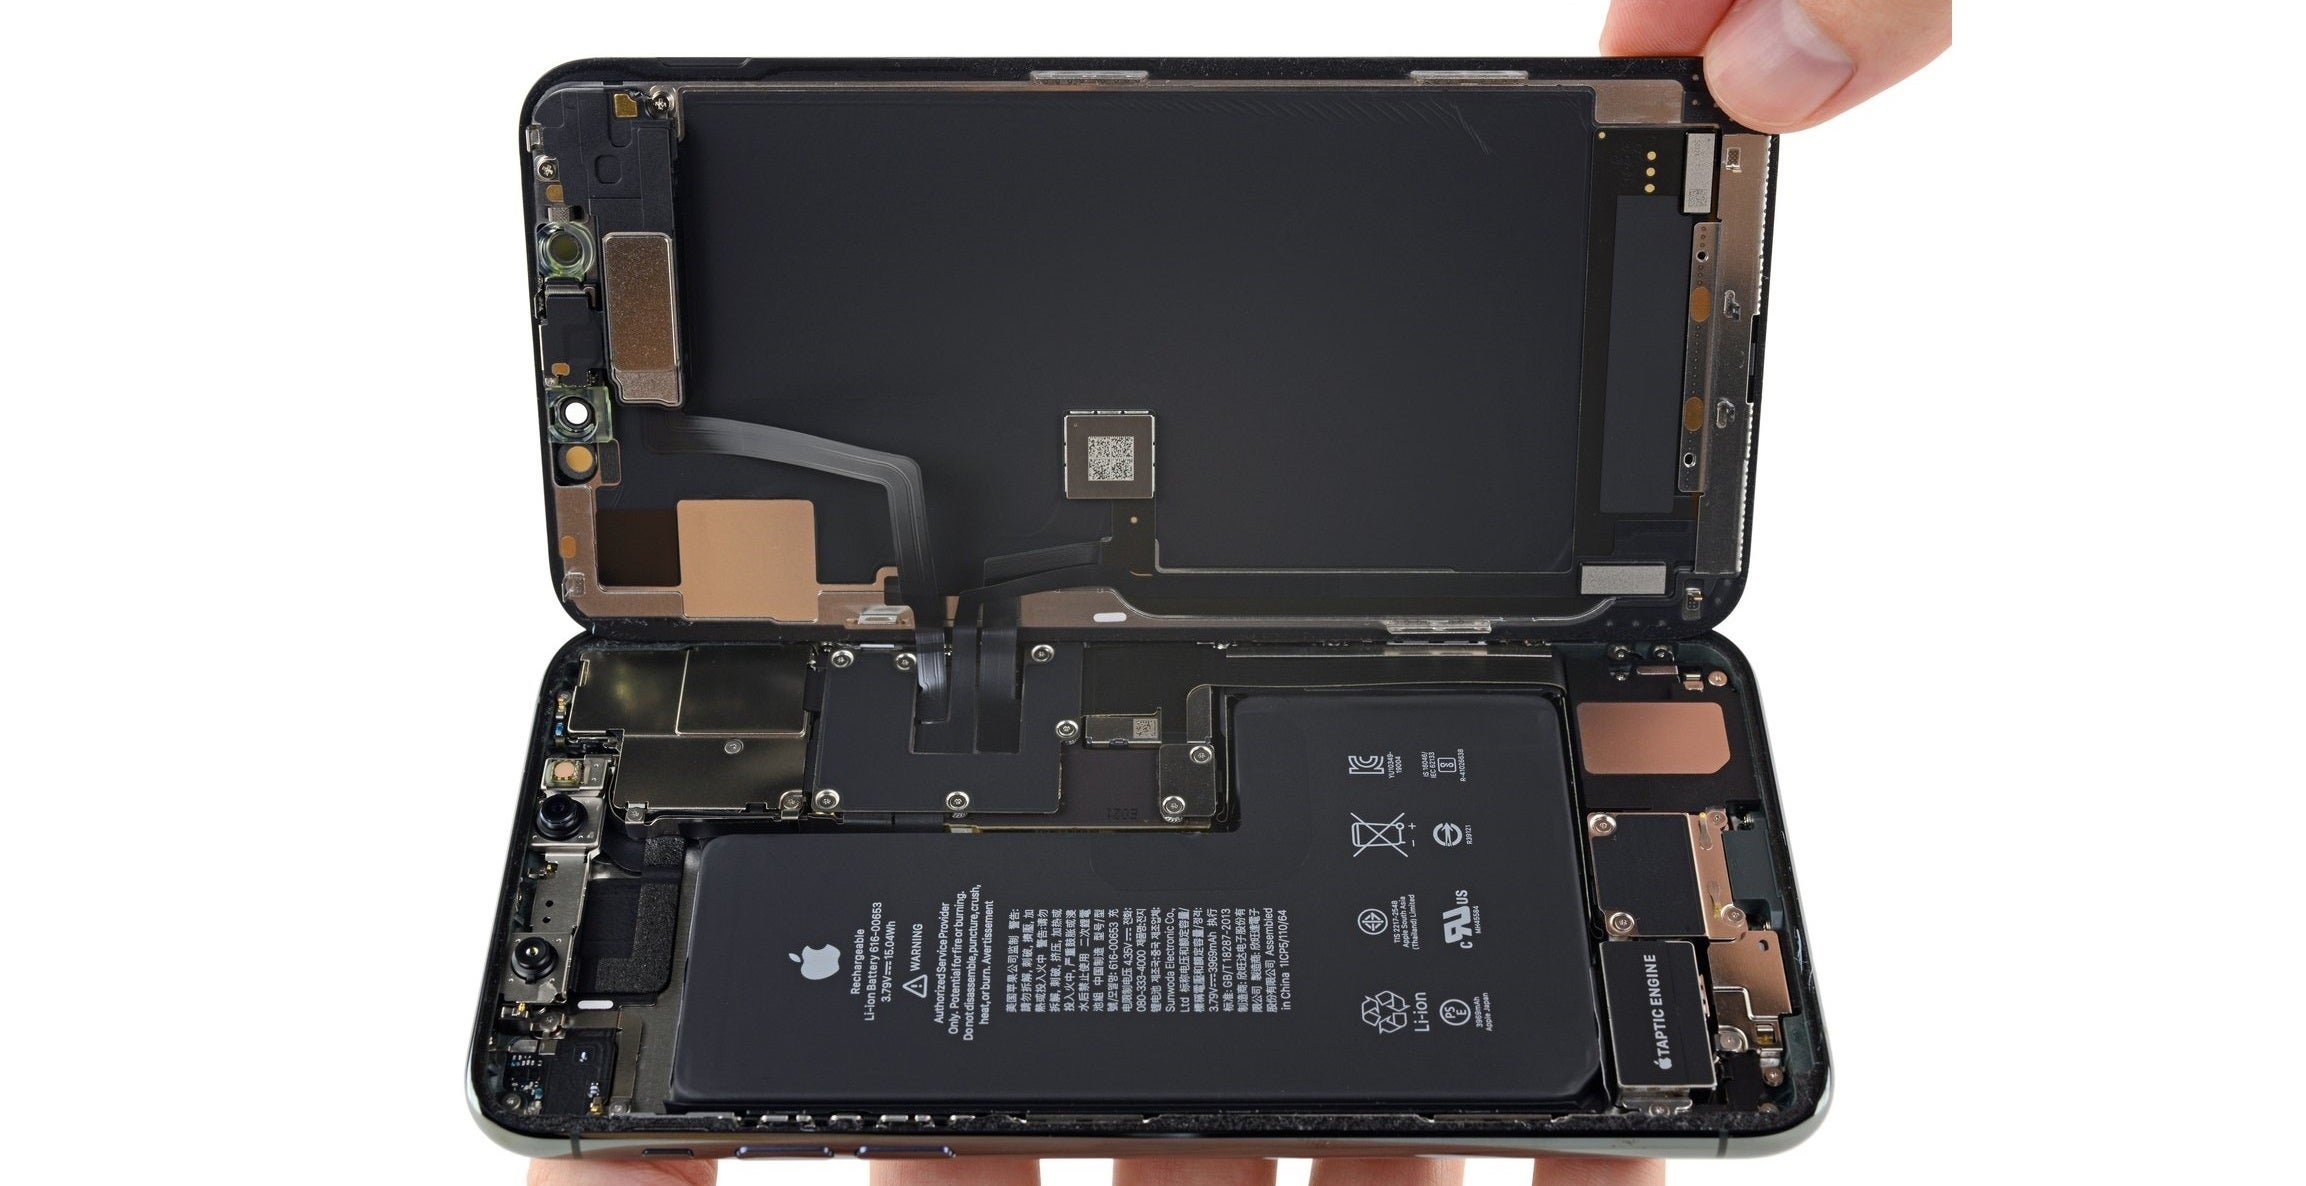 The massive battery of the iPhone 11 Pro Max is probably its most significant improvement, image iFixit.com - The hidden challenges and limitations of fast charging in smartphones